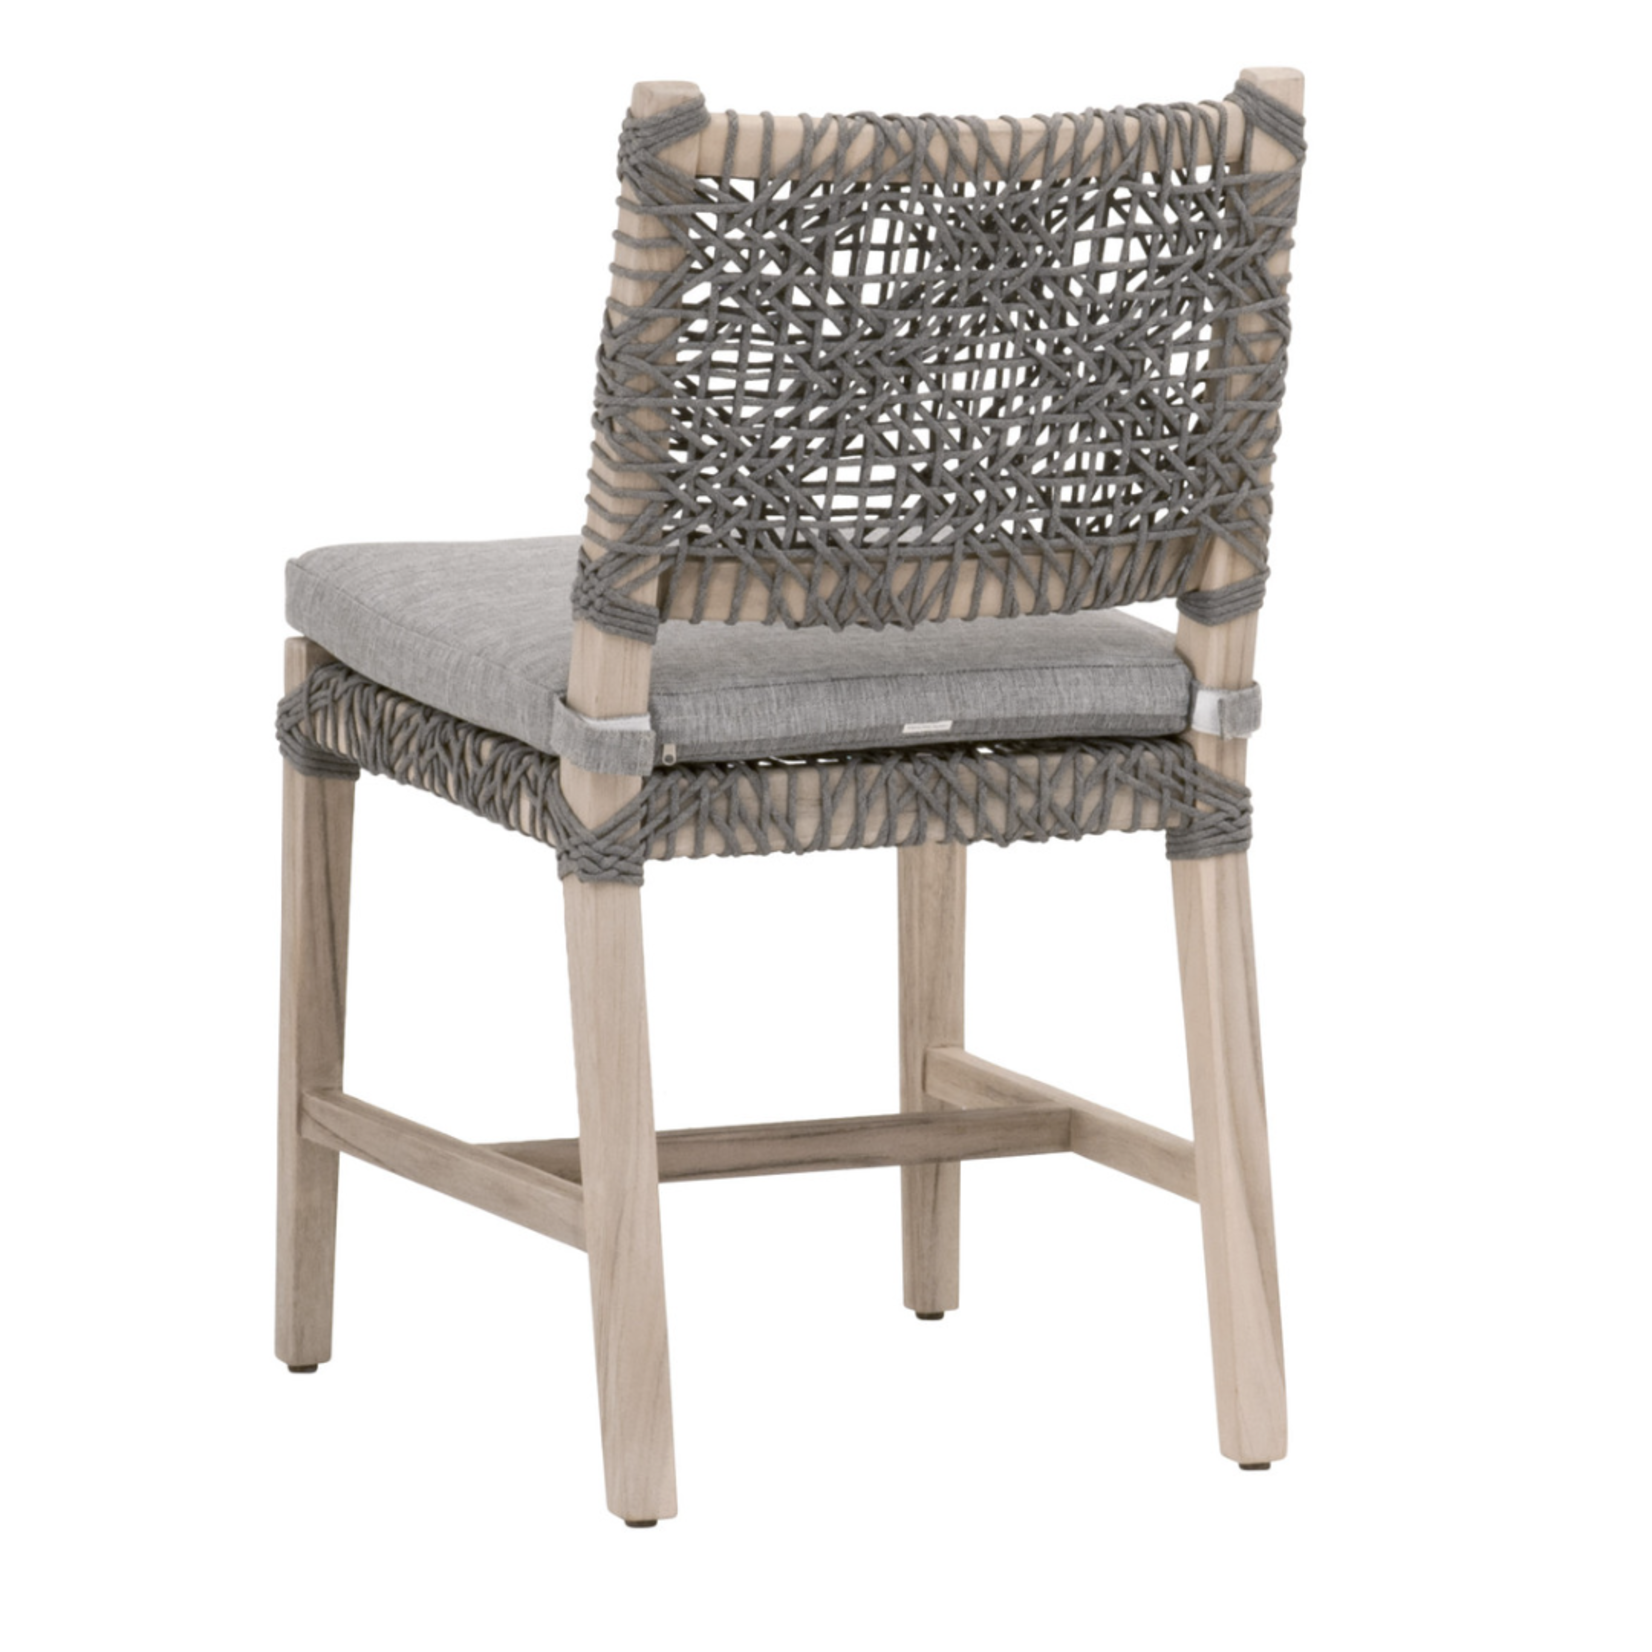 Outside The Box Costa Dove Rope Outdoor Dining Chair